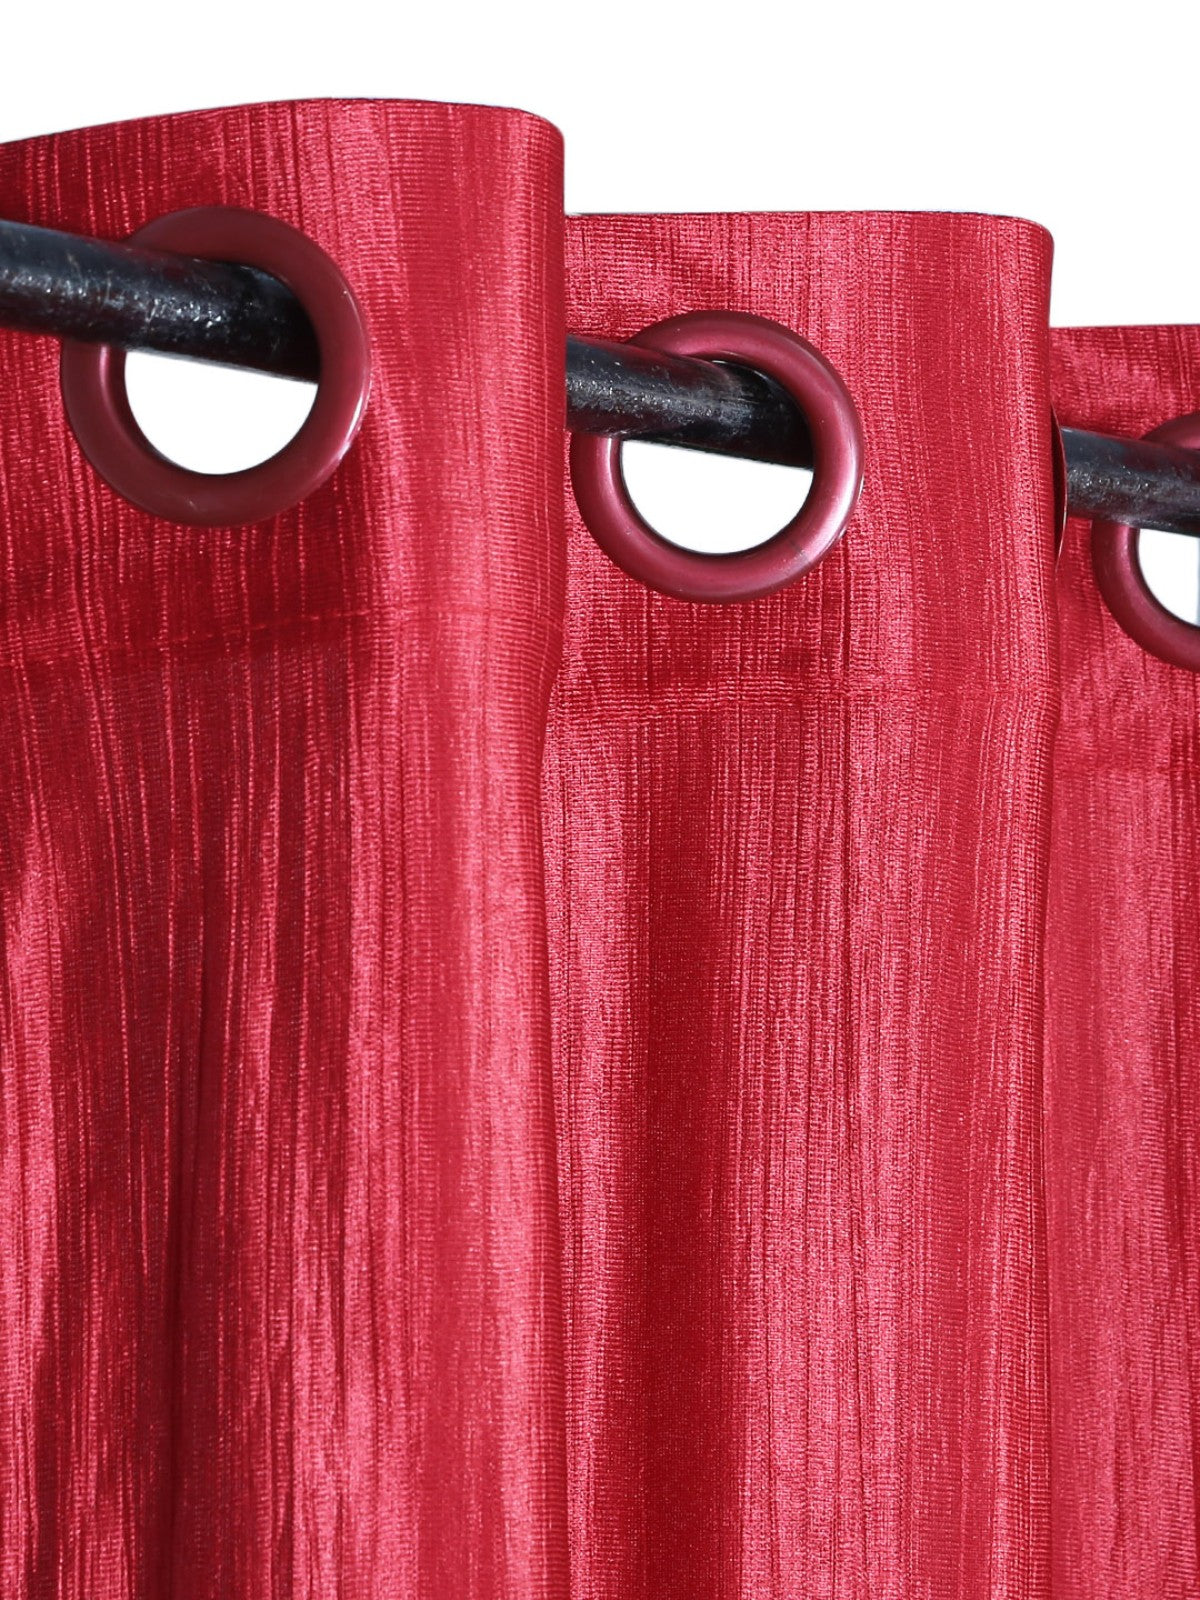 Romee Red Solid Patterned Set of 2 Long Door Curtains